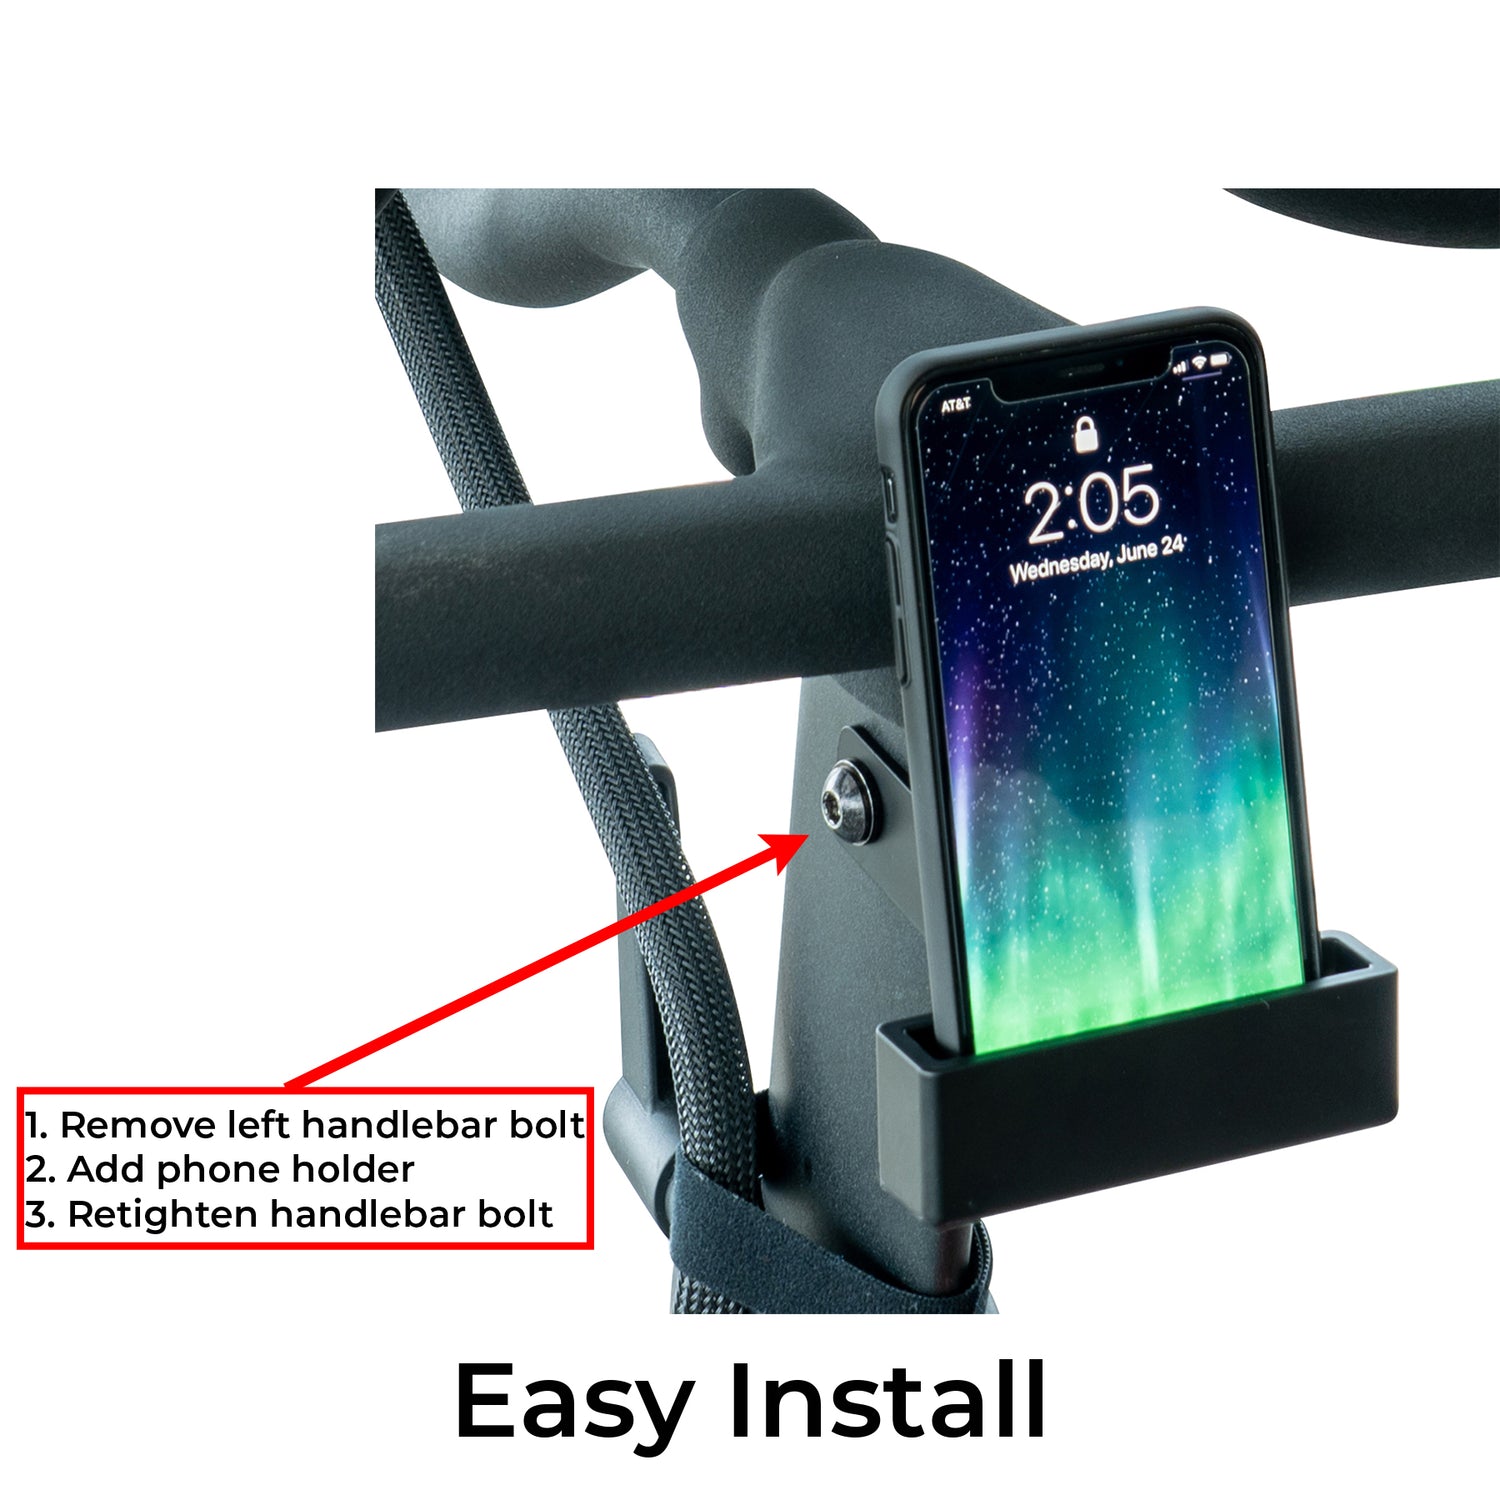 easy to install phone mount for Peloton bike